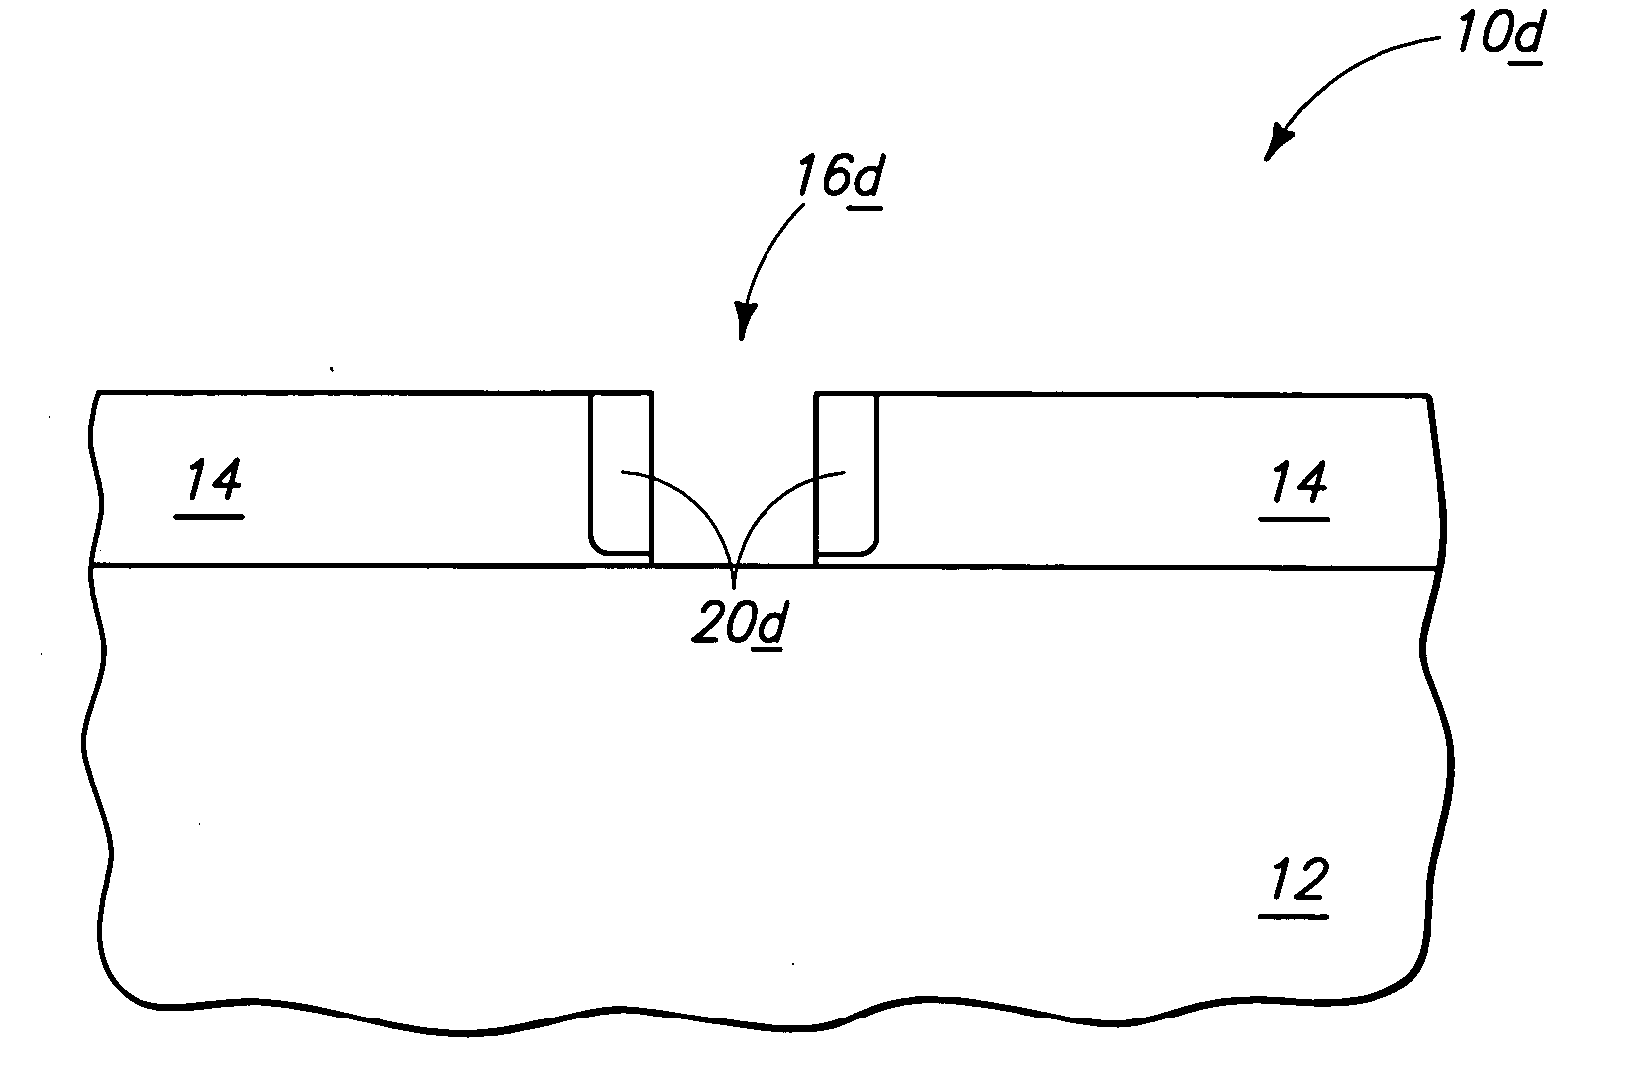 Methods of forming layers comprising epitaxial silicon